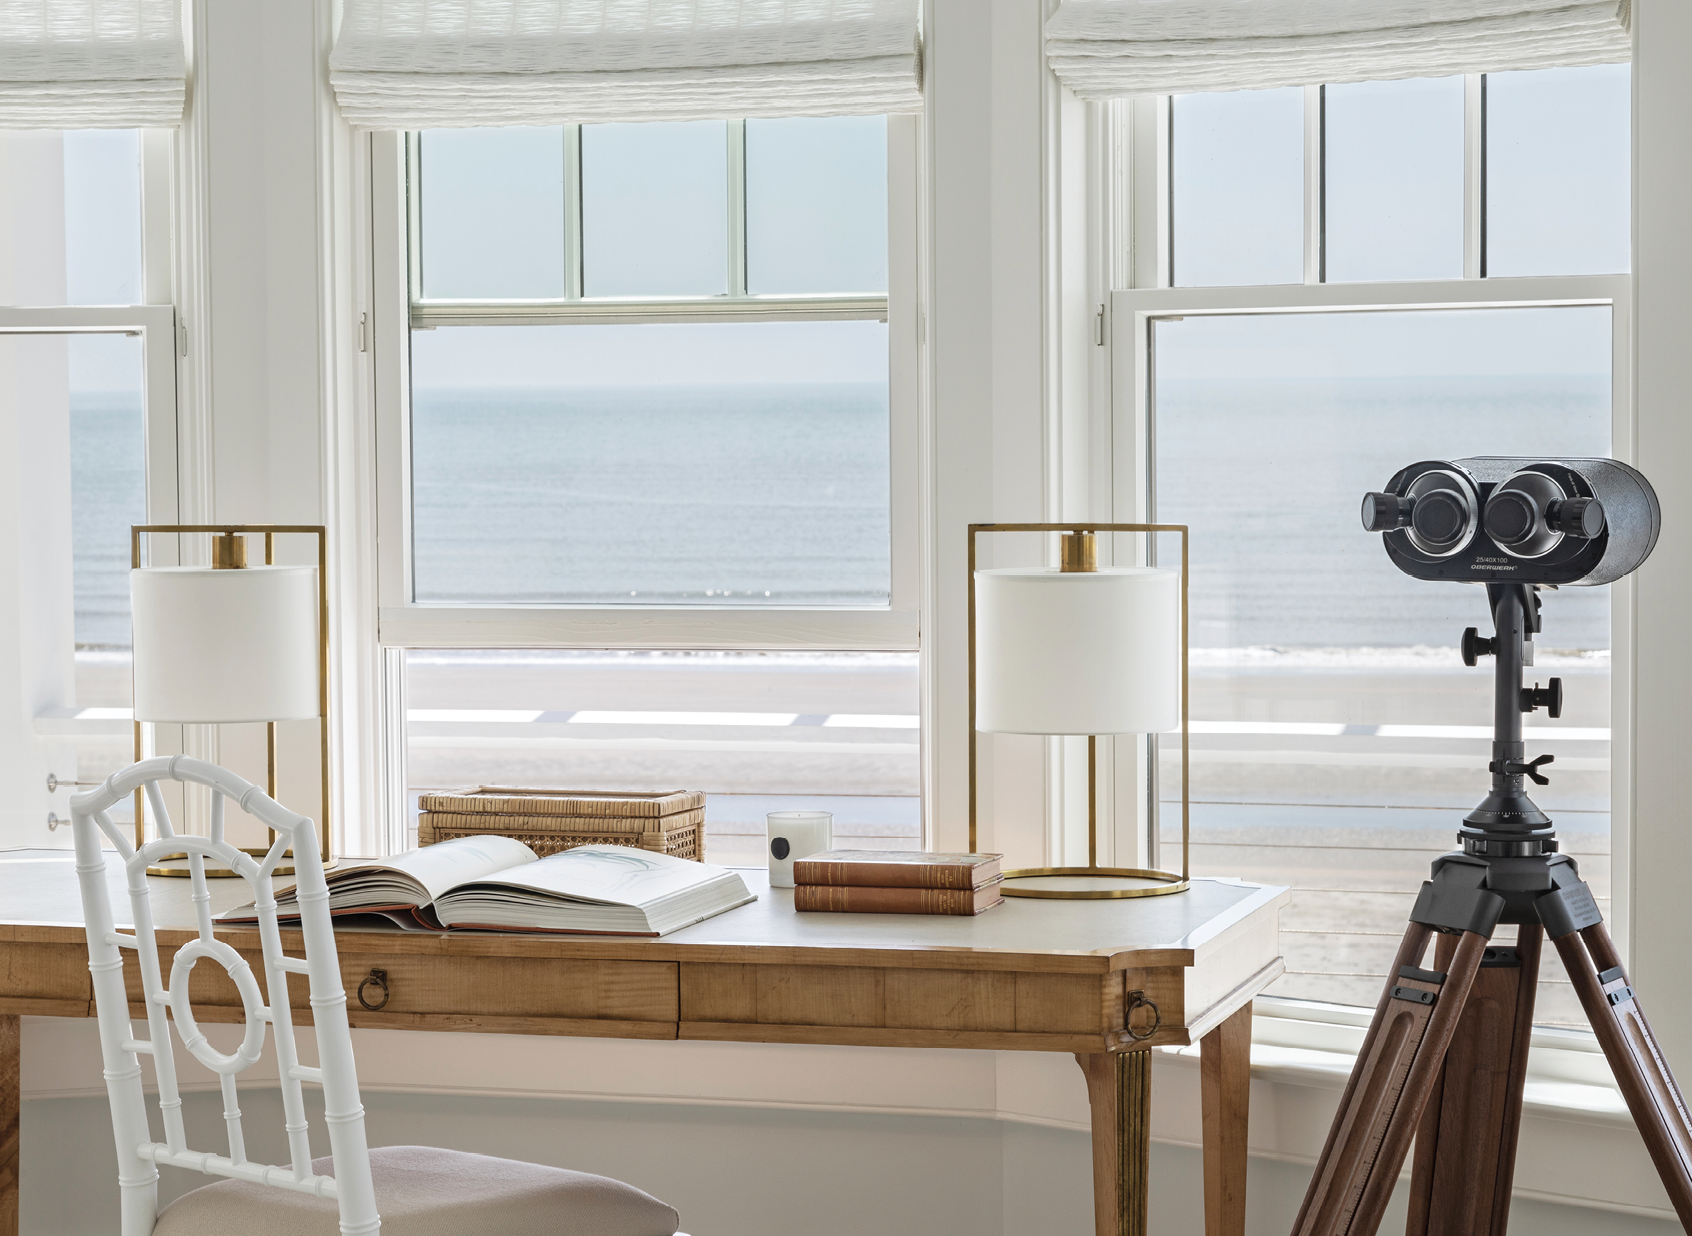 Tom’s office—located just off the bedroom—boasts panoramic views of the IOP shoreline.